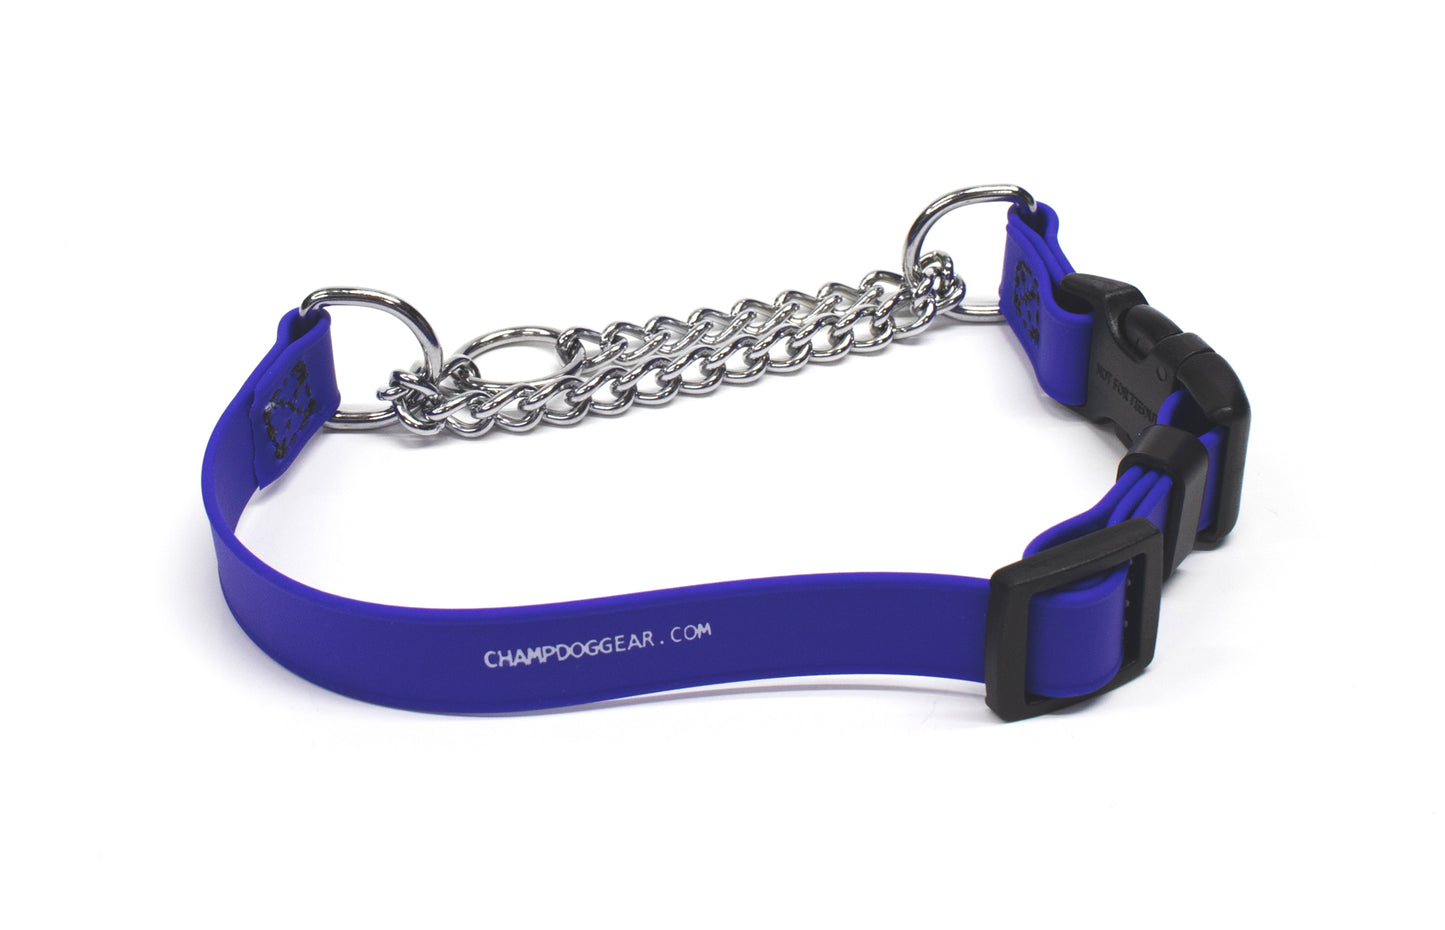 BioThane Chain Mart Adjustable with Quick Release